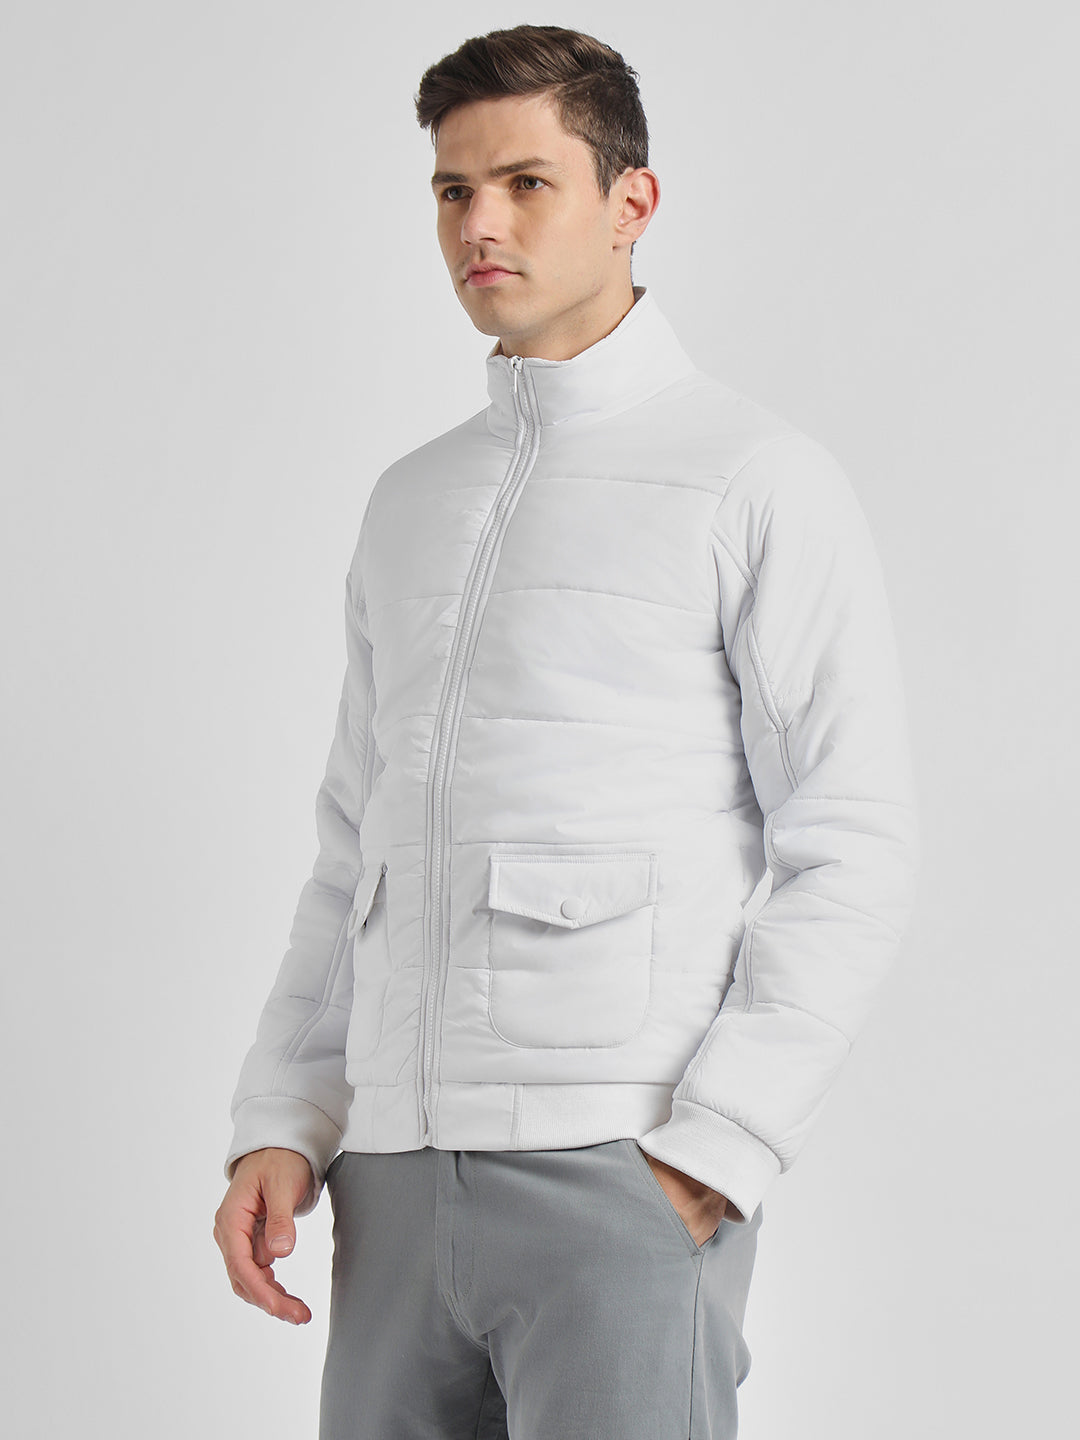 Dennis Lingo Men's White Solid Quilted High Neck Full Sleeve Puffer W/O hood Jackets